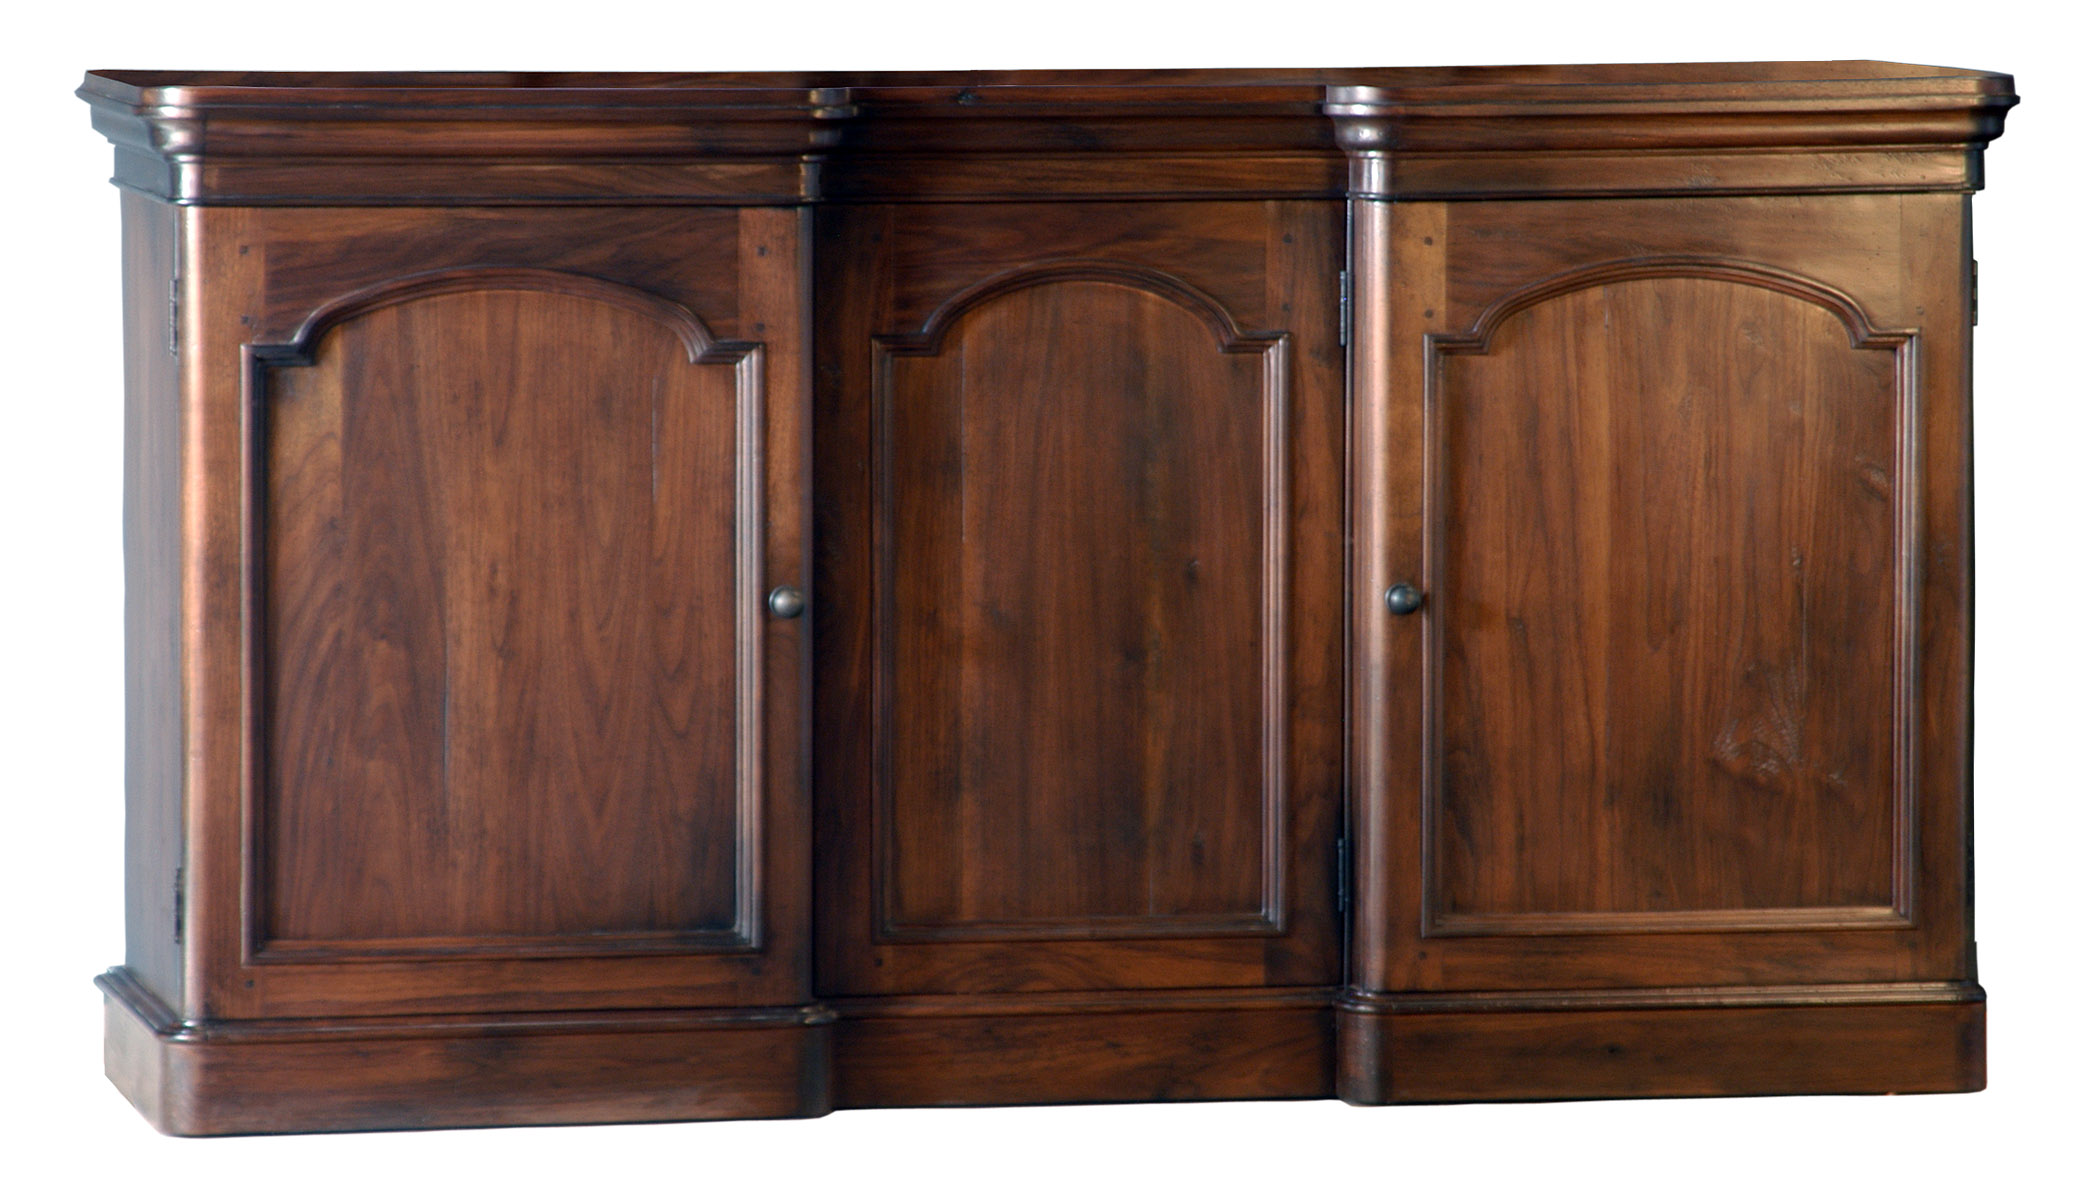 Cullen server buffet cabinet with arched panels by Woodland furniture in Idaho Falls